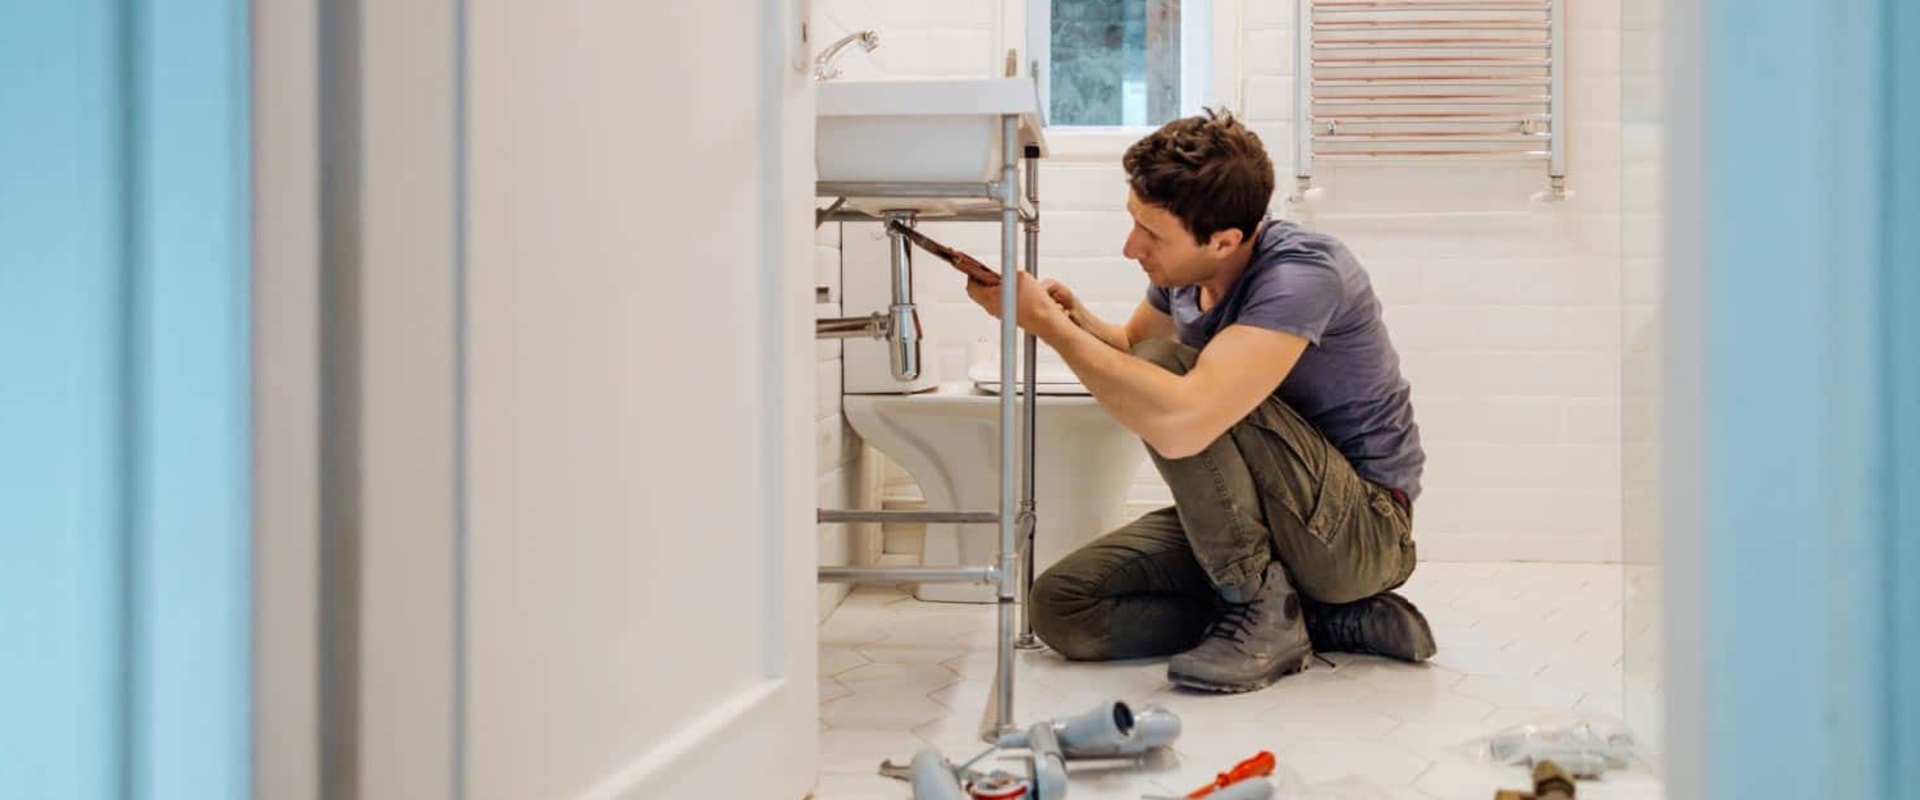 Gas Plumbing Services By The Top Plumbing Contractor In Nashville, Tennessee